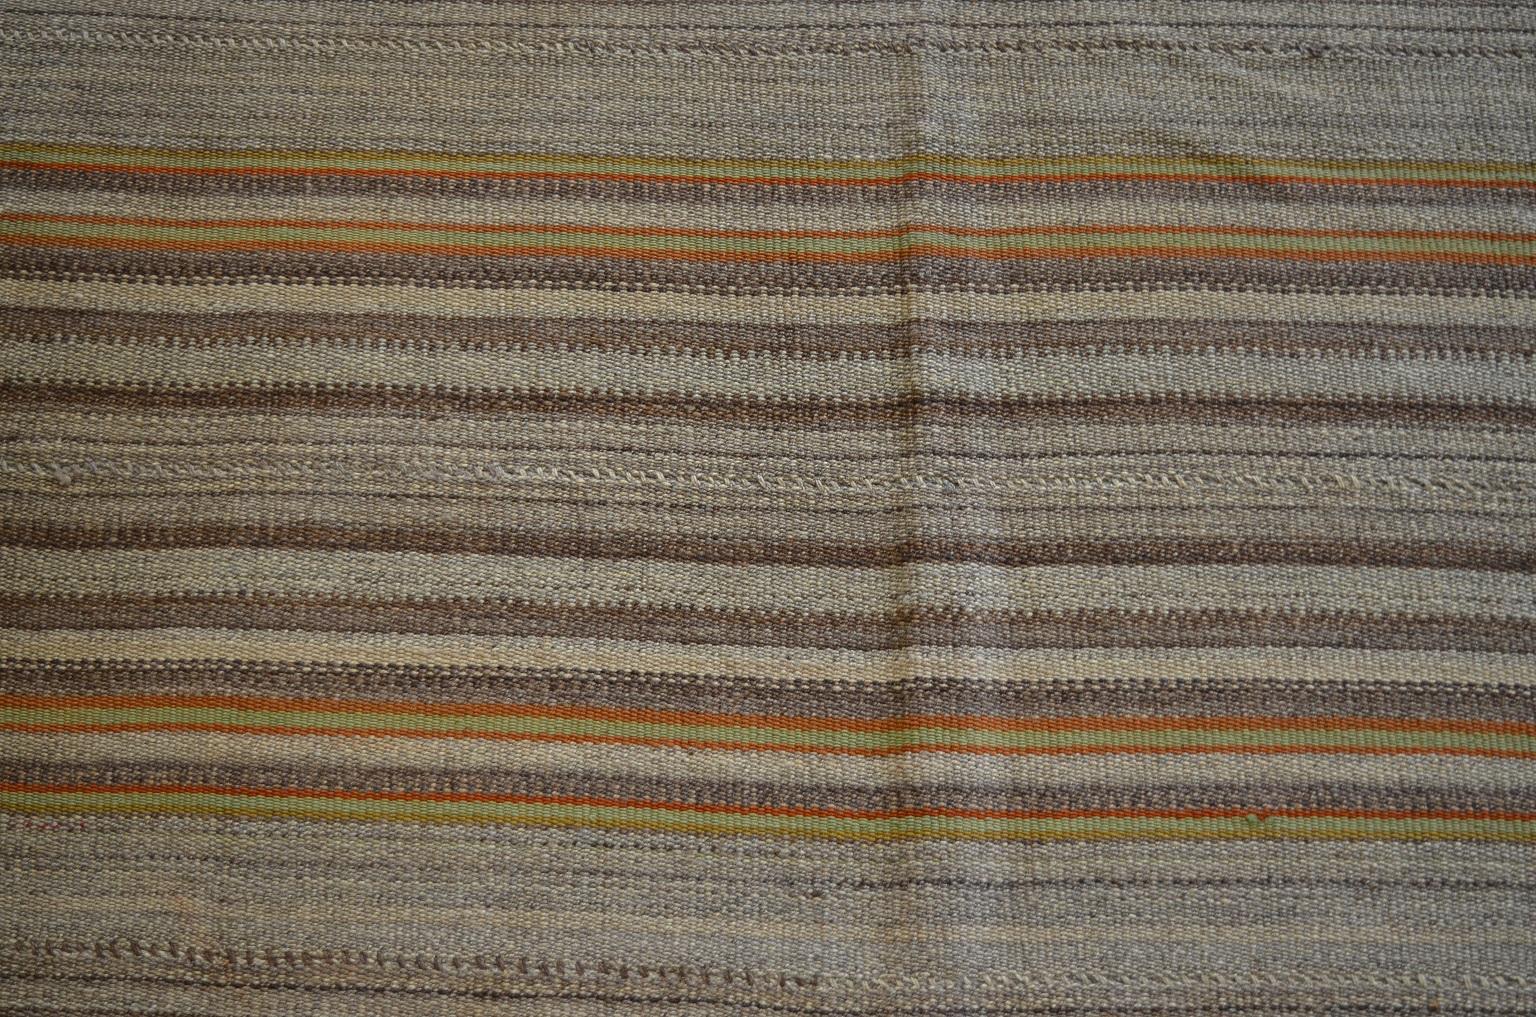 Antique 1900s Wool Persian Jajim Kilim Rug, 8' x 11' In Good Condition For Sale In New York, NY